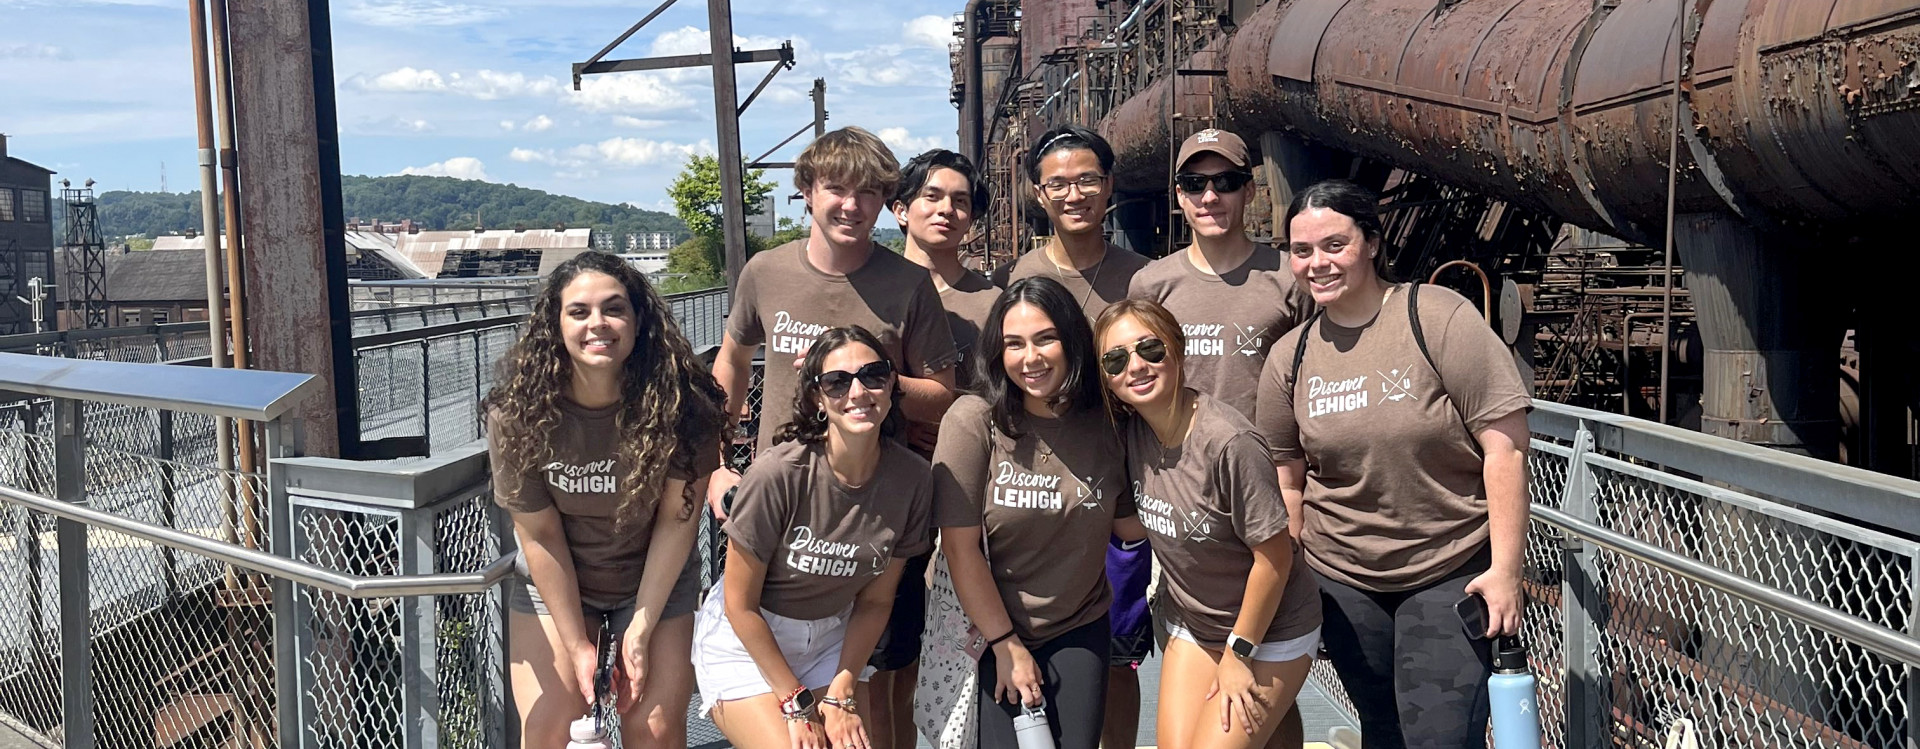 Discover Lehigh at the Steel Stacks